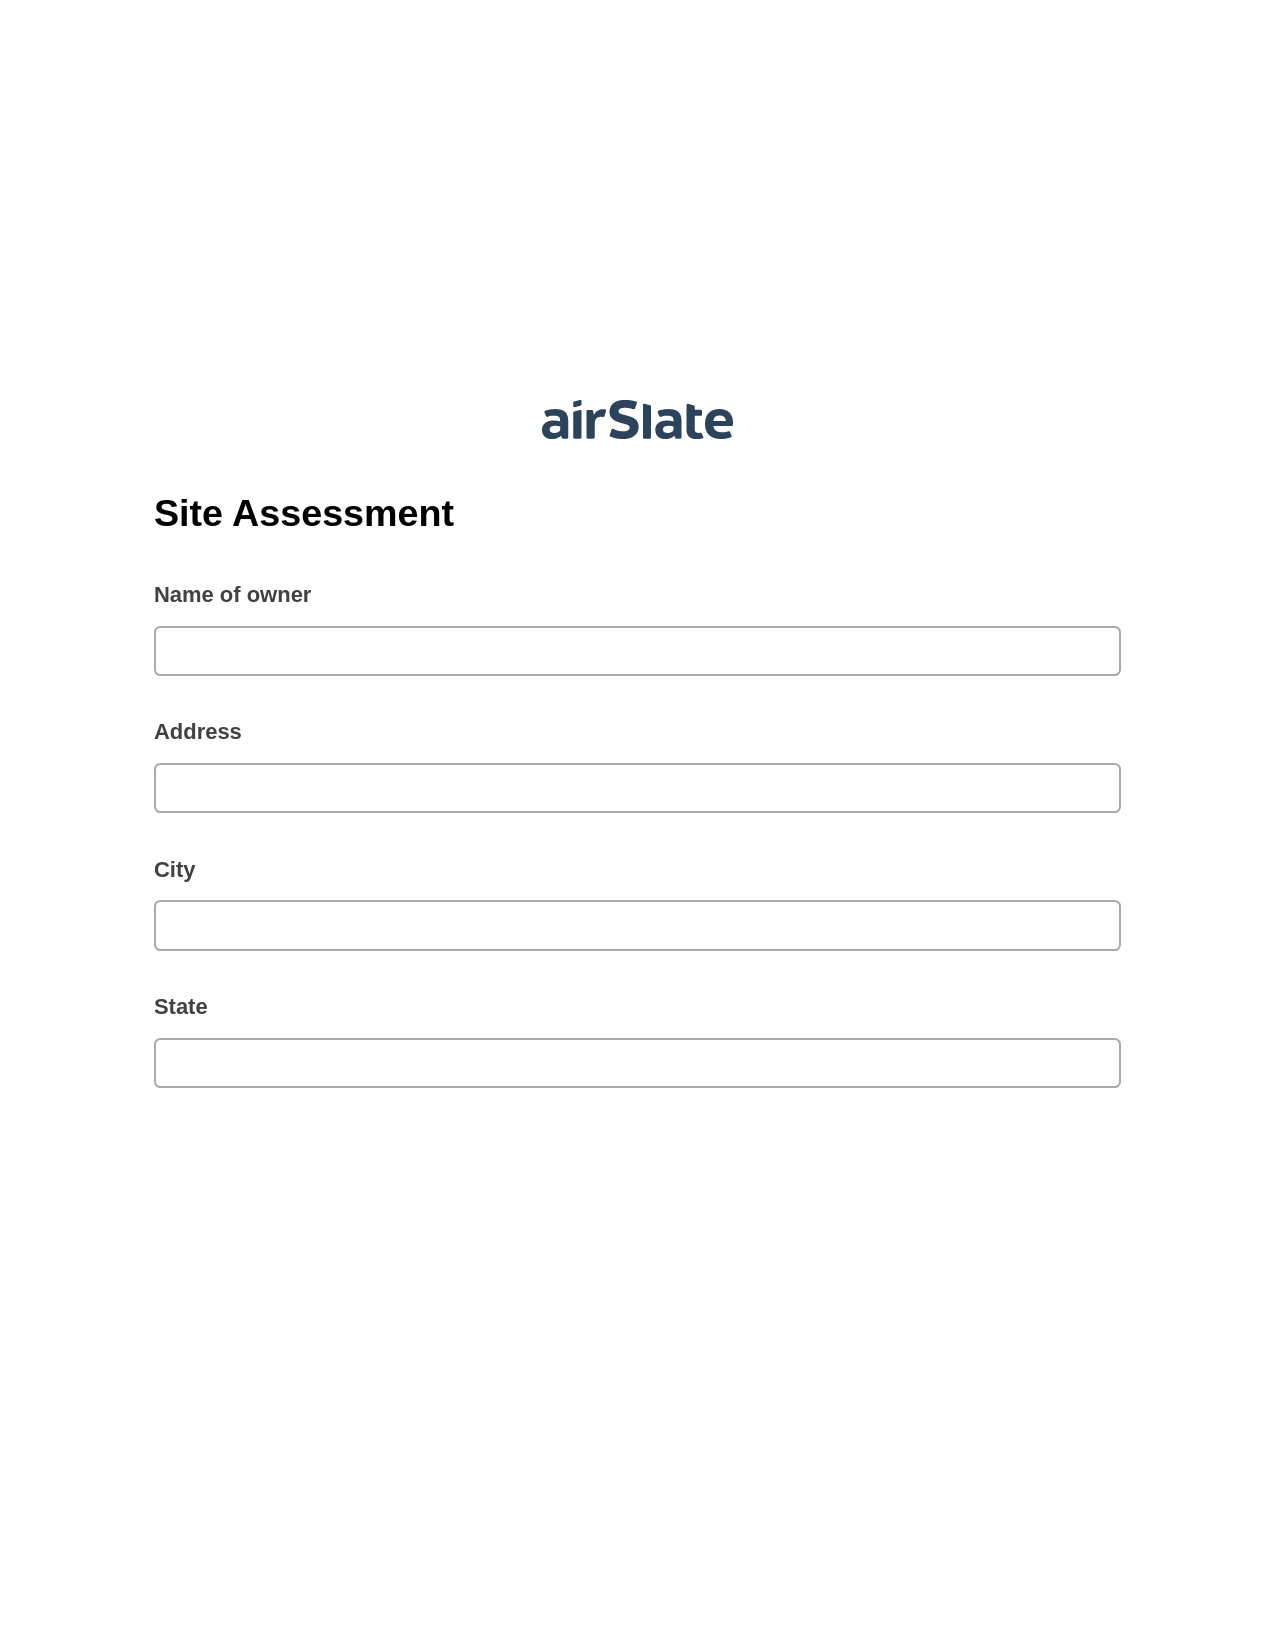 Site Assessment Pre-fill from NetSuite Records Bot, Reminder Bot, Archive to SharePoint Folder Bot